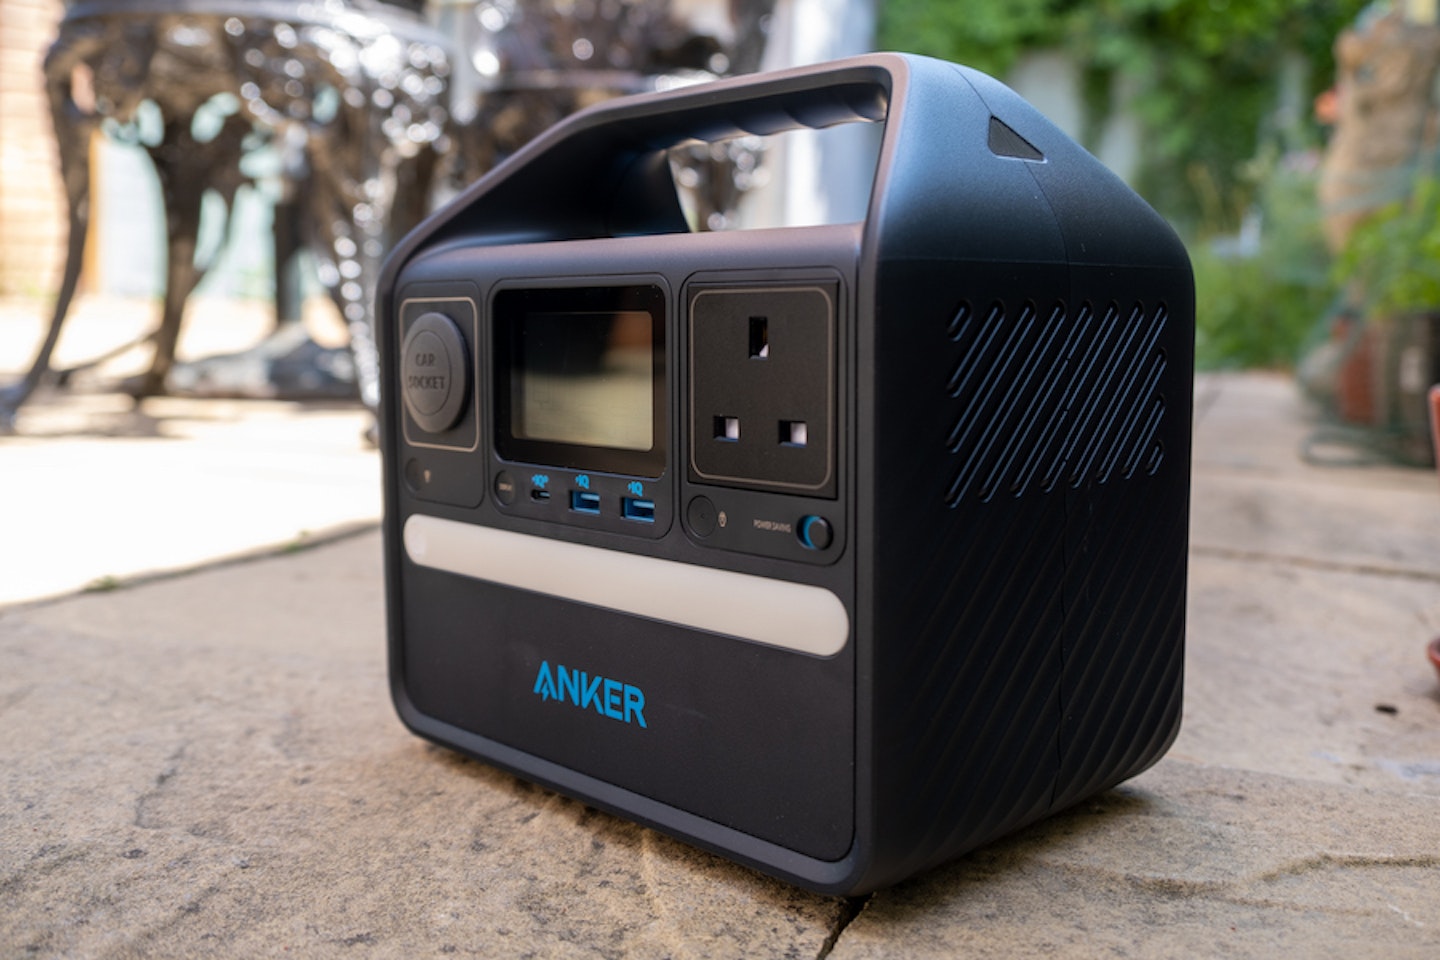 Anker's PowerHouse 521 power station is down to its lowest price ever on